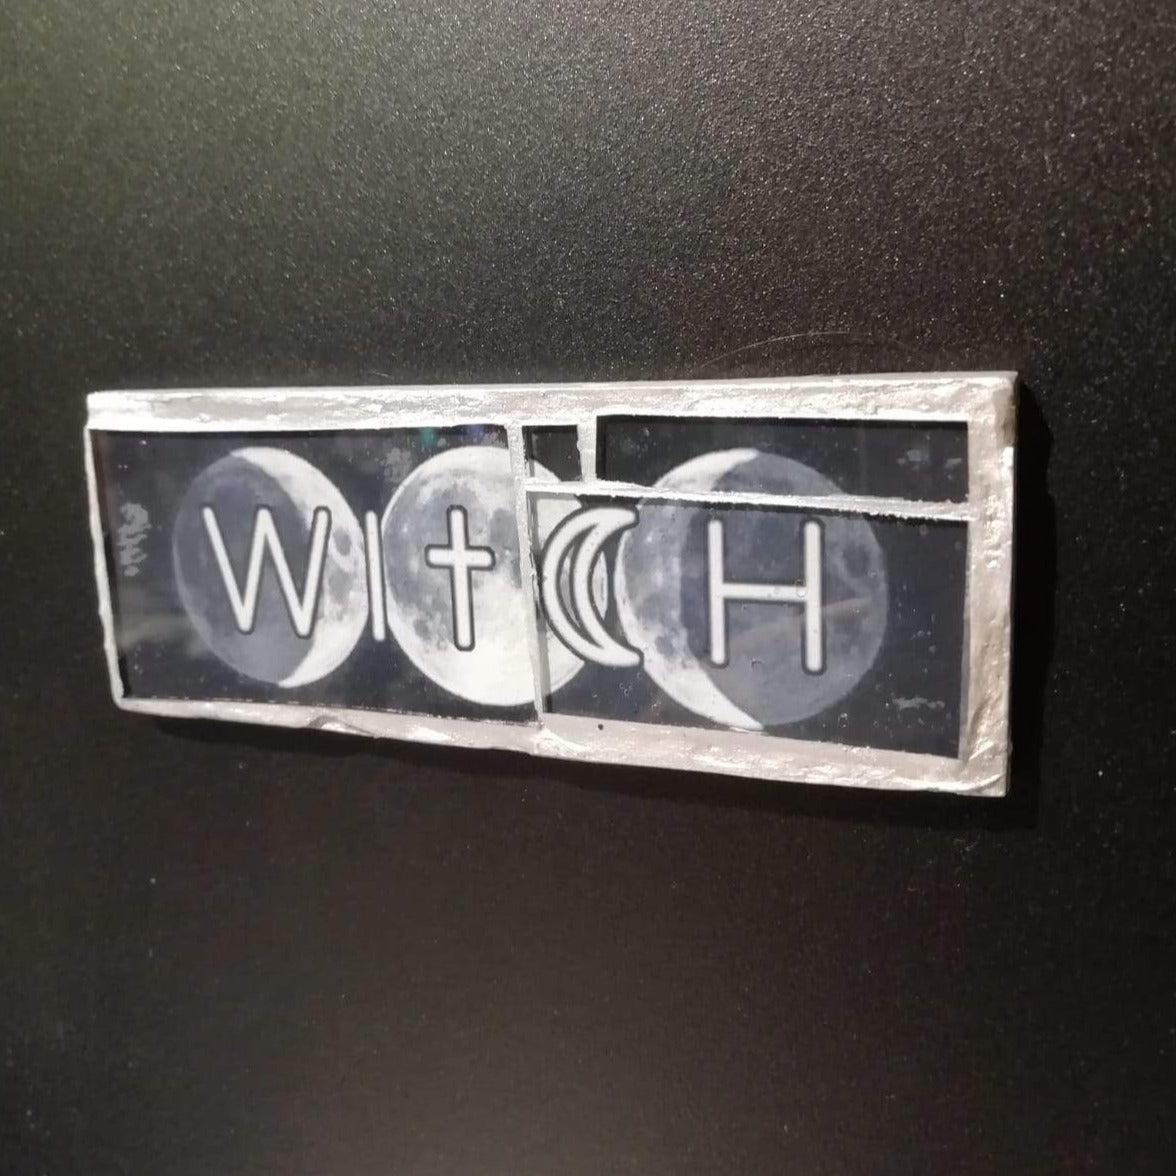 Glass mosaic magnet "Witch"